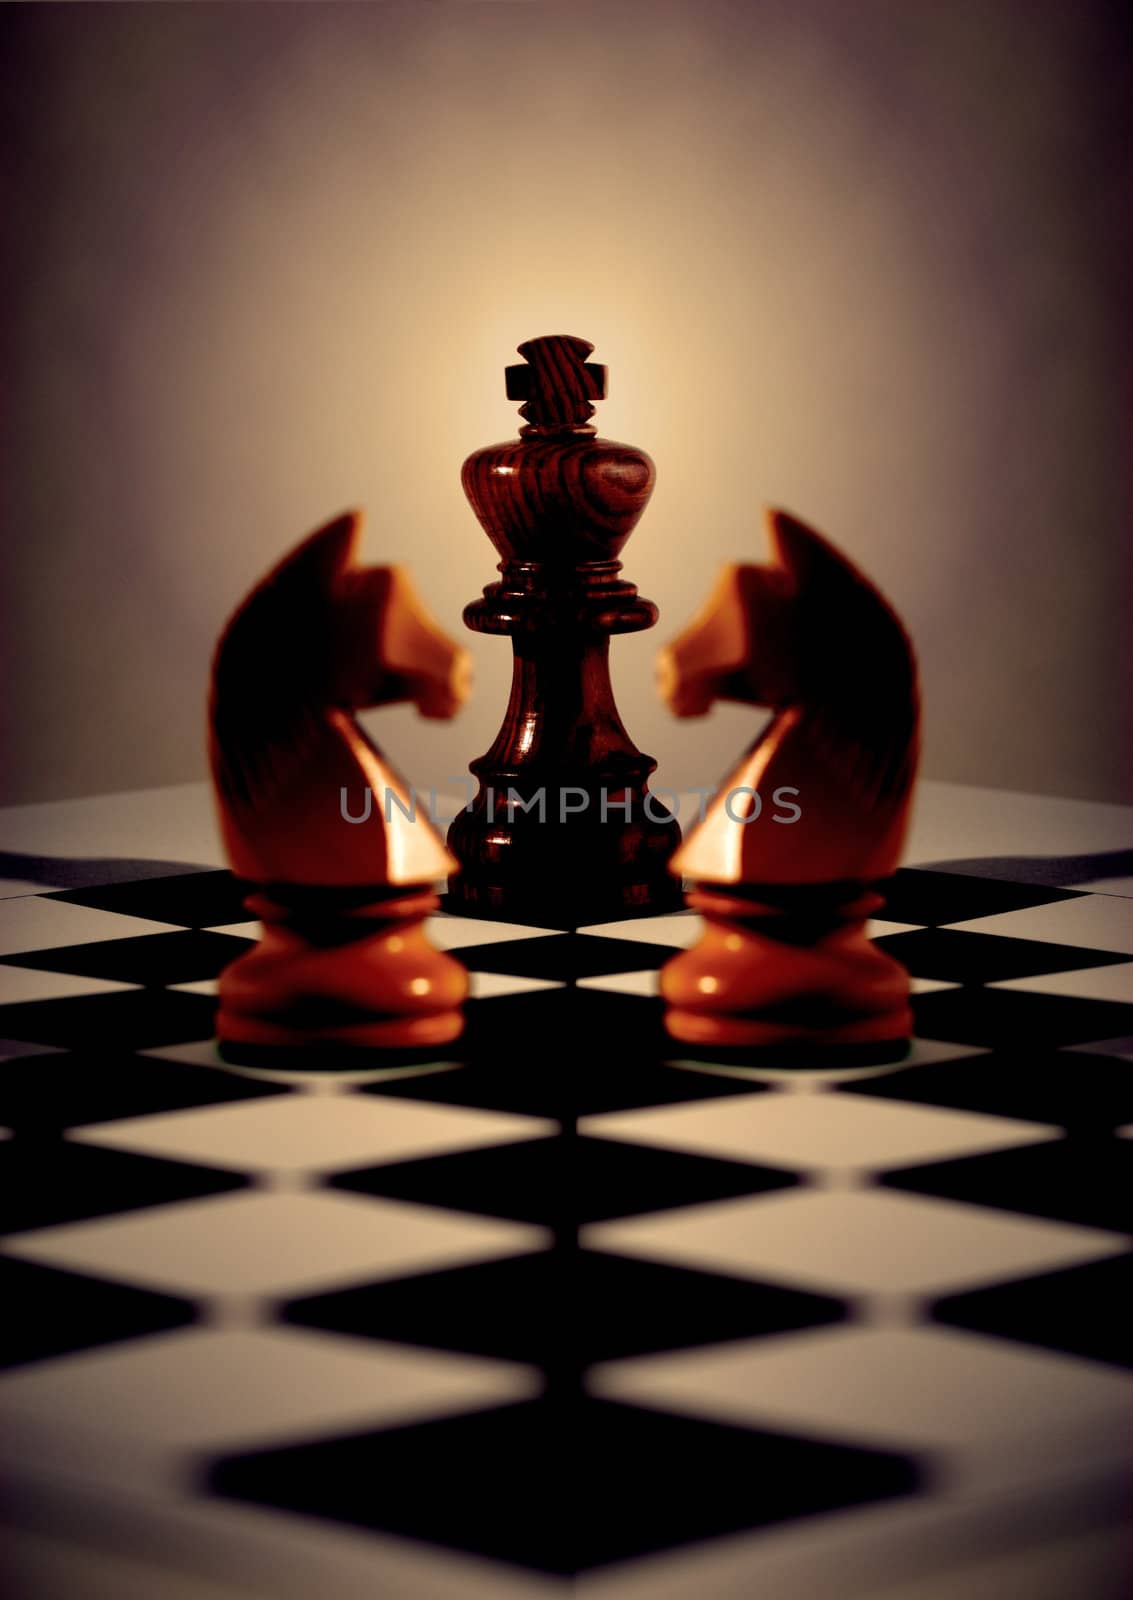 Black king with light behind, two white knights mirrored for symmetry, on diagonal chess board. Concepts business or religious or board meeting. Focus on King.